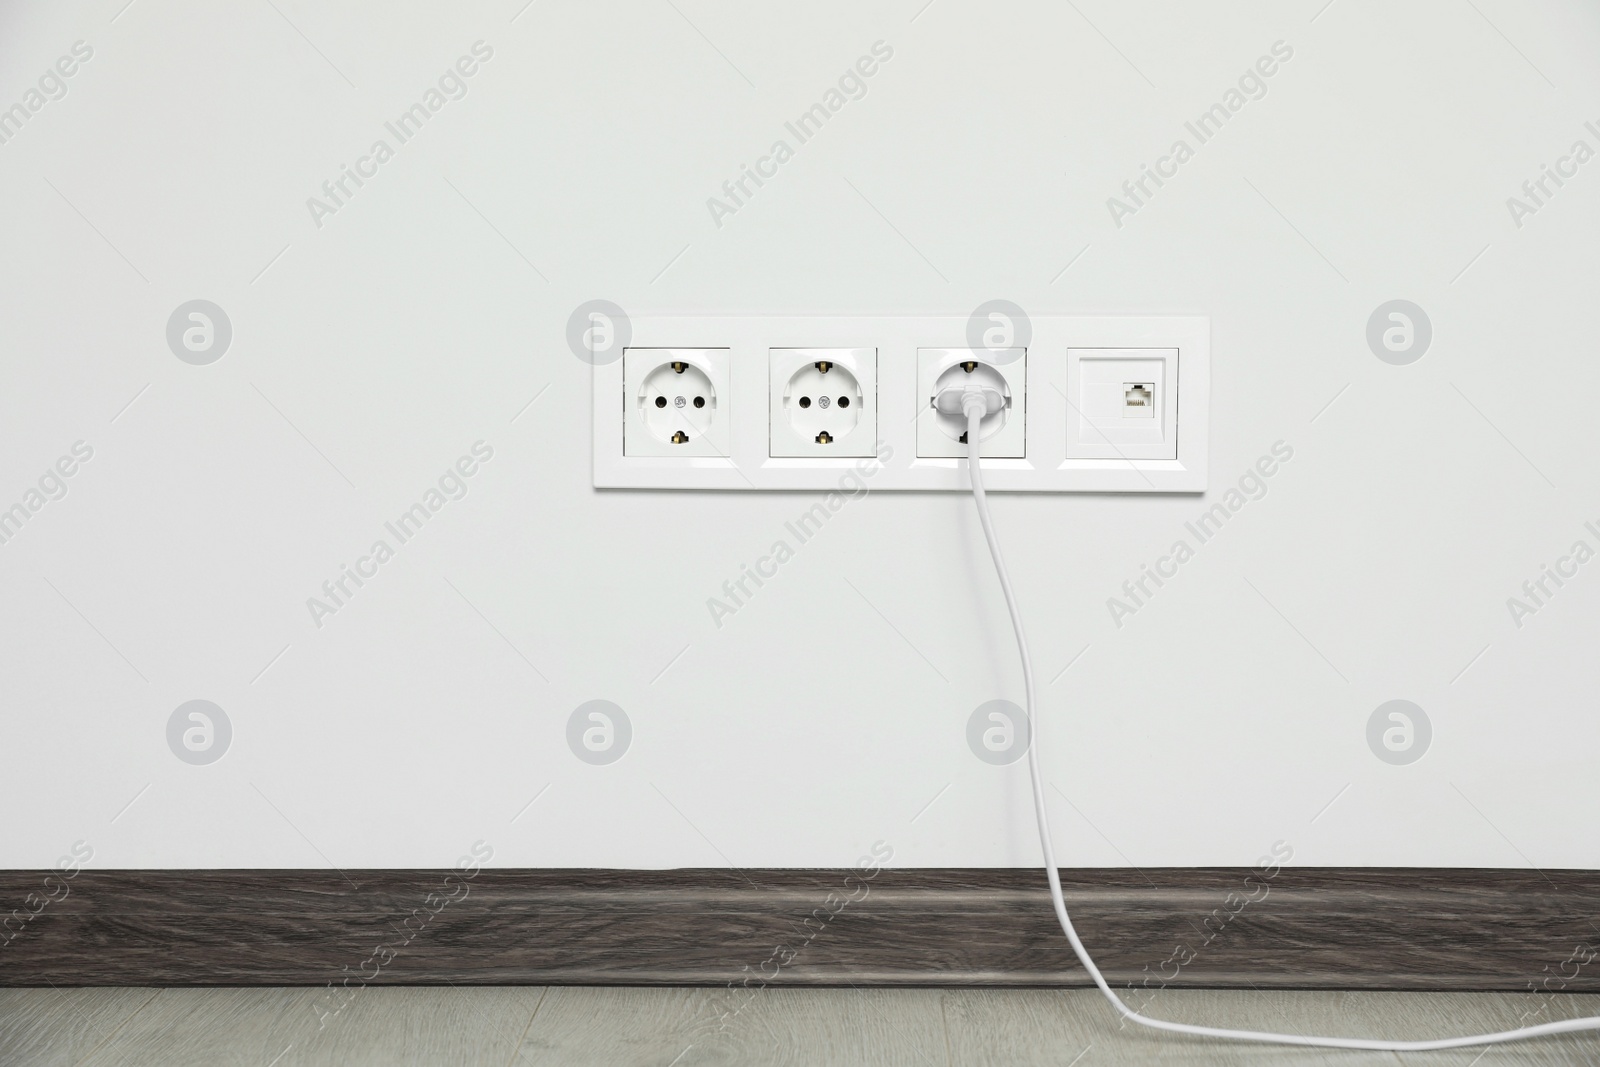 Photo of Power sockets with inserted plug on white wall indoors. Electrical supply